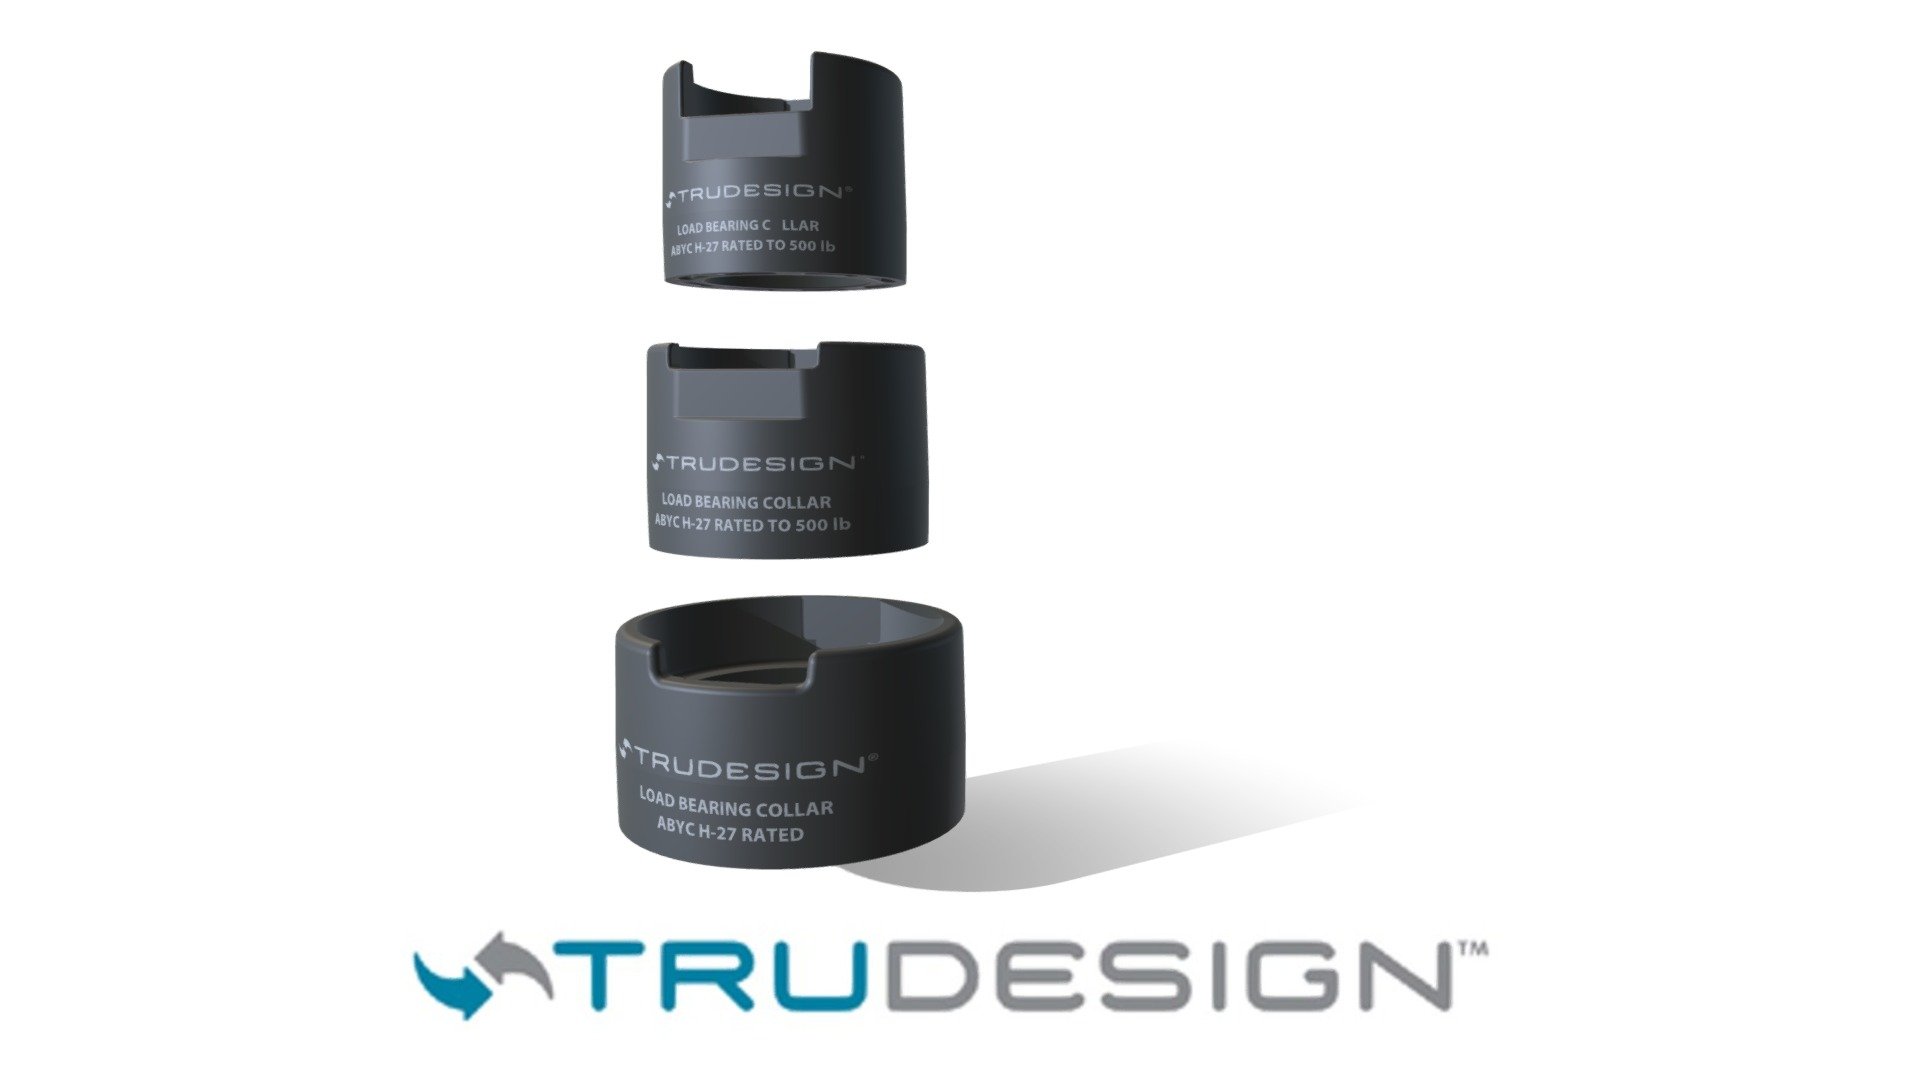 TruDesign Load Bearing Collars are designed for use with TruDesign Skin Fittings and Ball Valves. 
With the Collar in place, the Skin Fitting-Ball Valve-Hose Tail assembly will withstand a 500 lb (227 kg) static force applied to the Hose Tail end of the assembly, for a minimum of 30 seconds – complying with North American ABYC H-27 standards.
For more information visit: https://www.tek-tanks.com/shop/product/trudesign-load-bearing-collars - TruDesign Load Bearing Collars - 3D model by Tek Tanks (@martinrye) 3d model